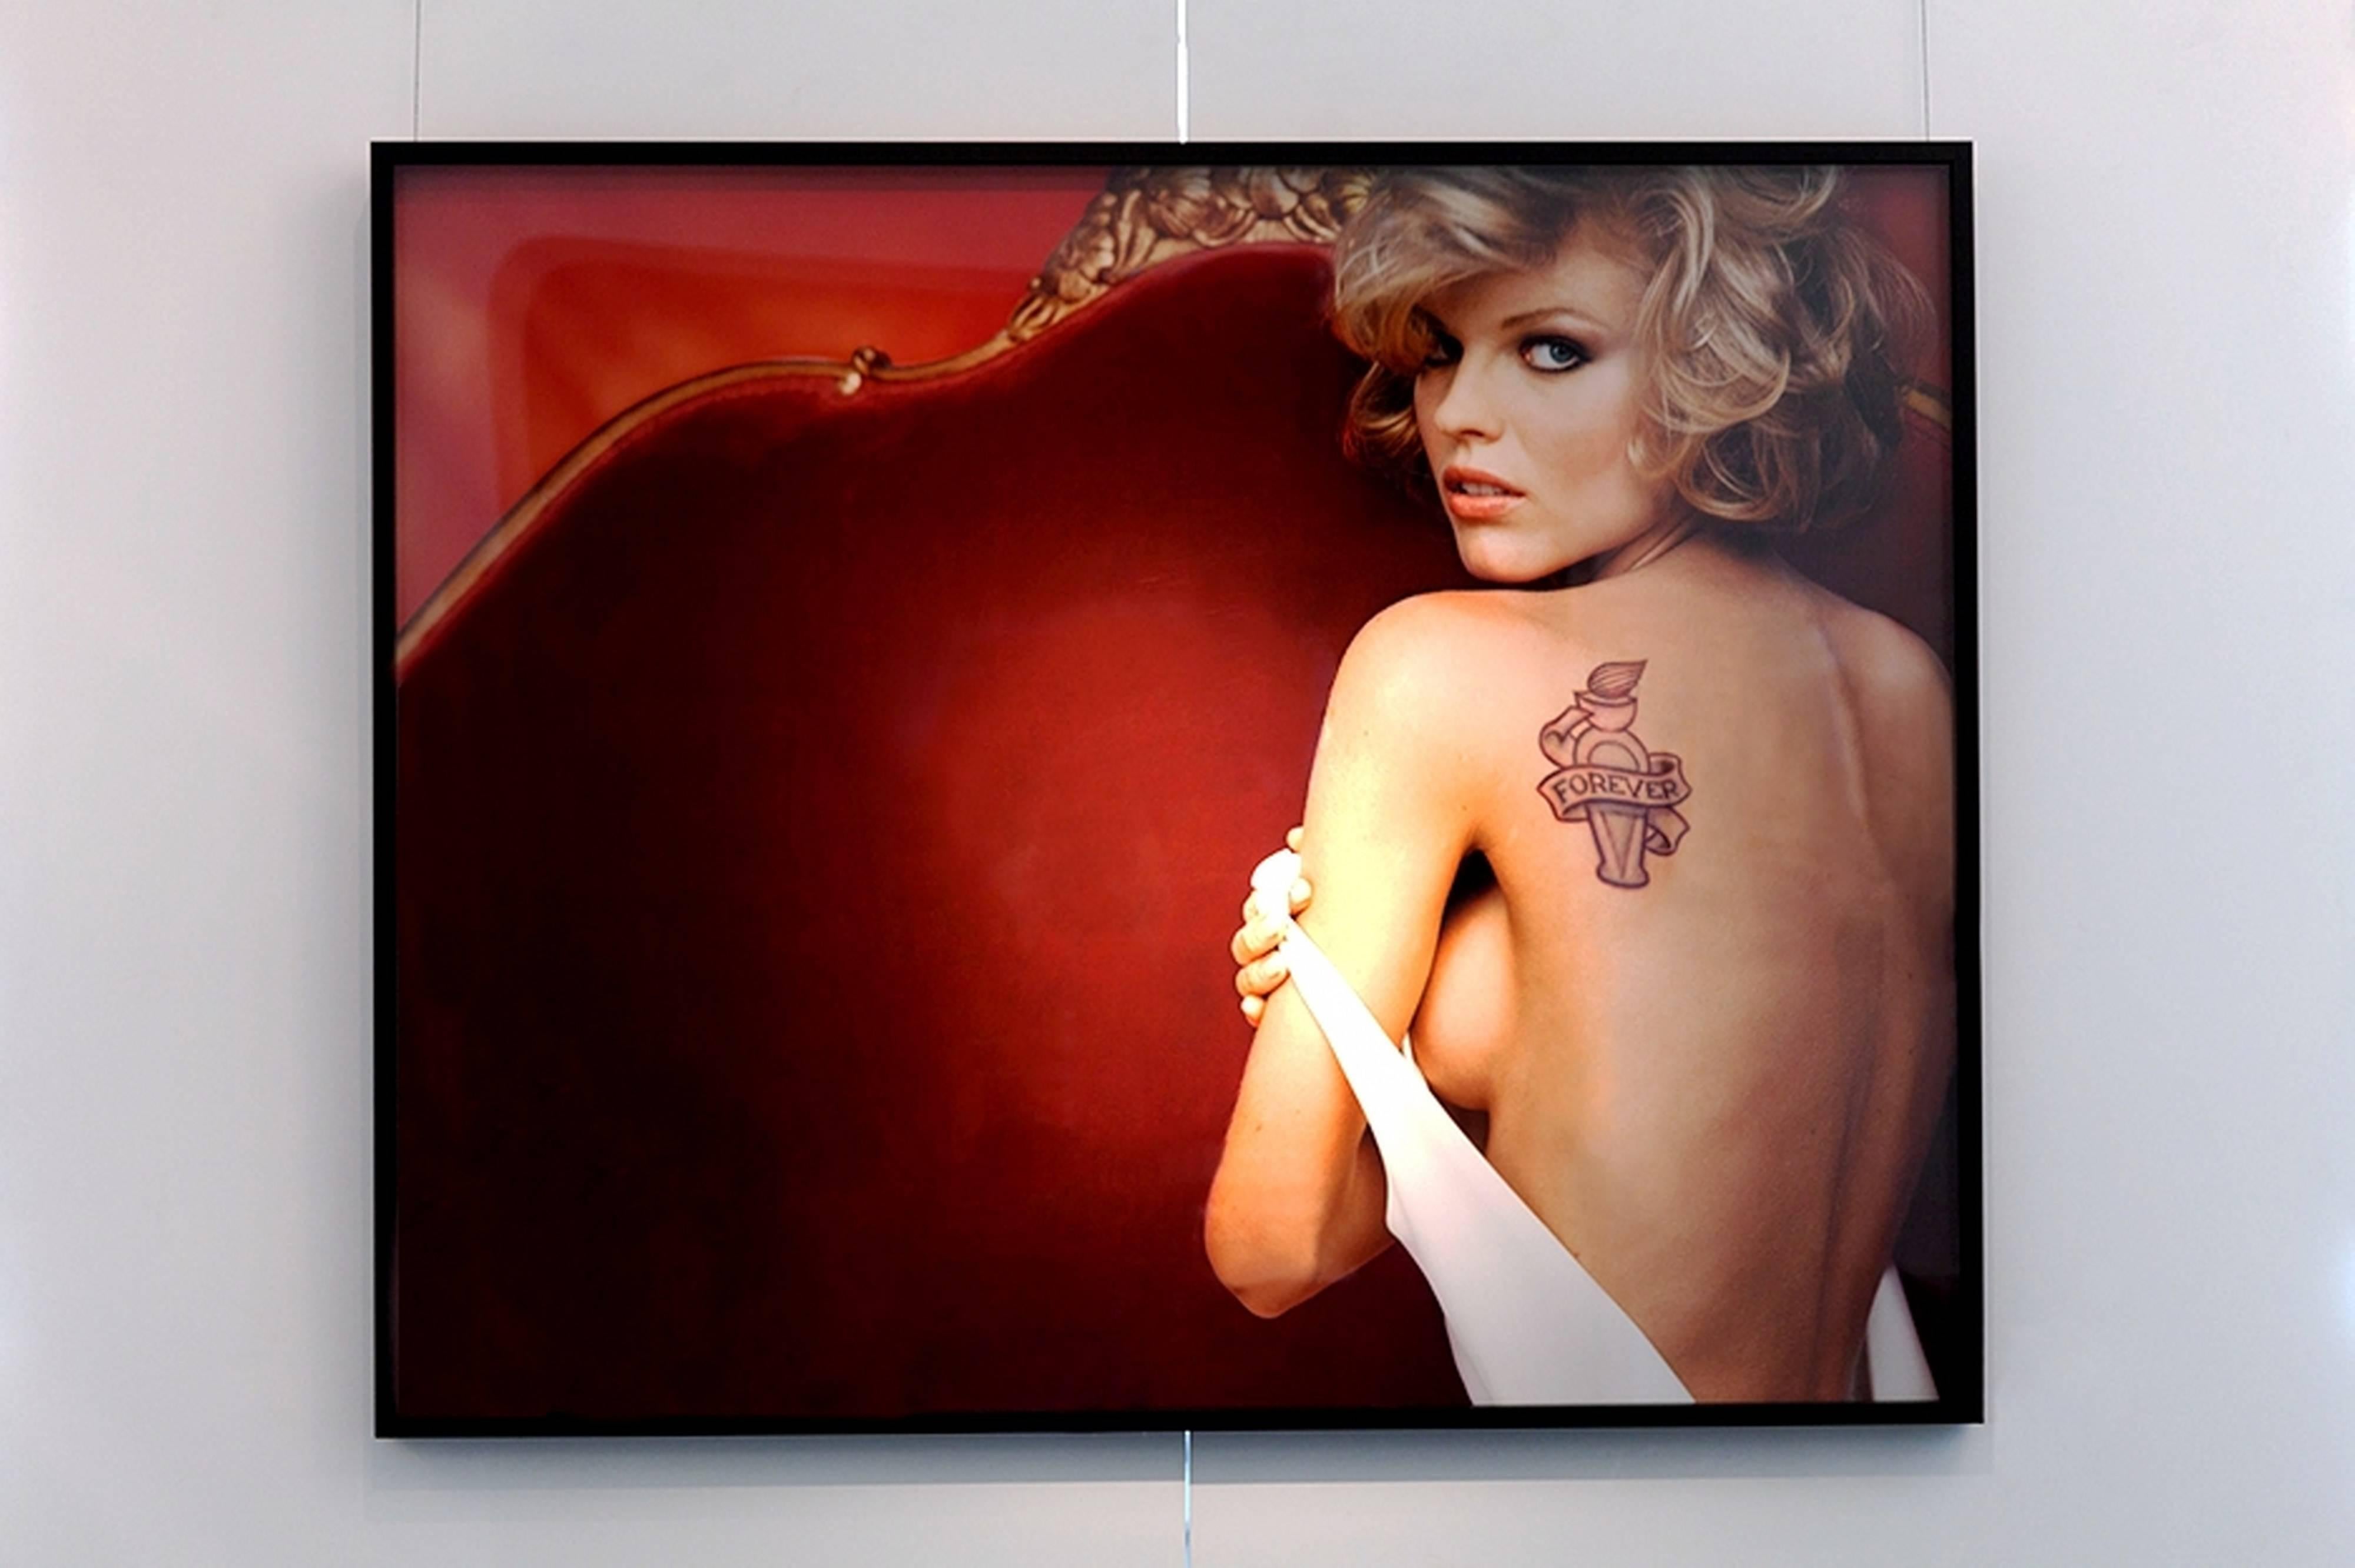 Supermodel Eva Herzigova on a red sofa showing her naked back with tatoo  - Photograph by Michel Comte